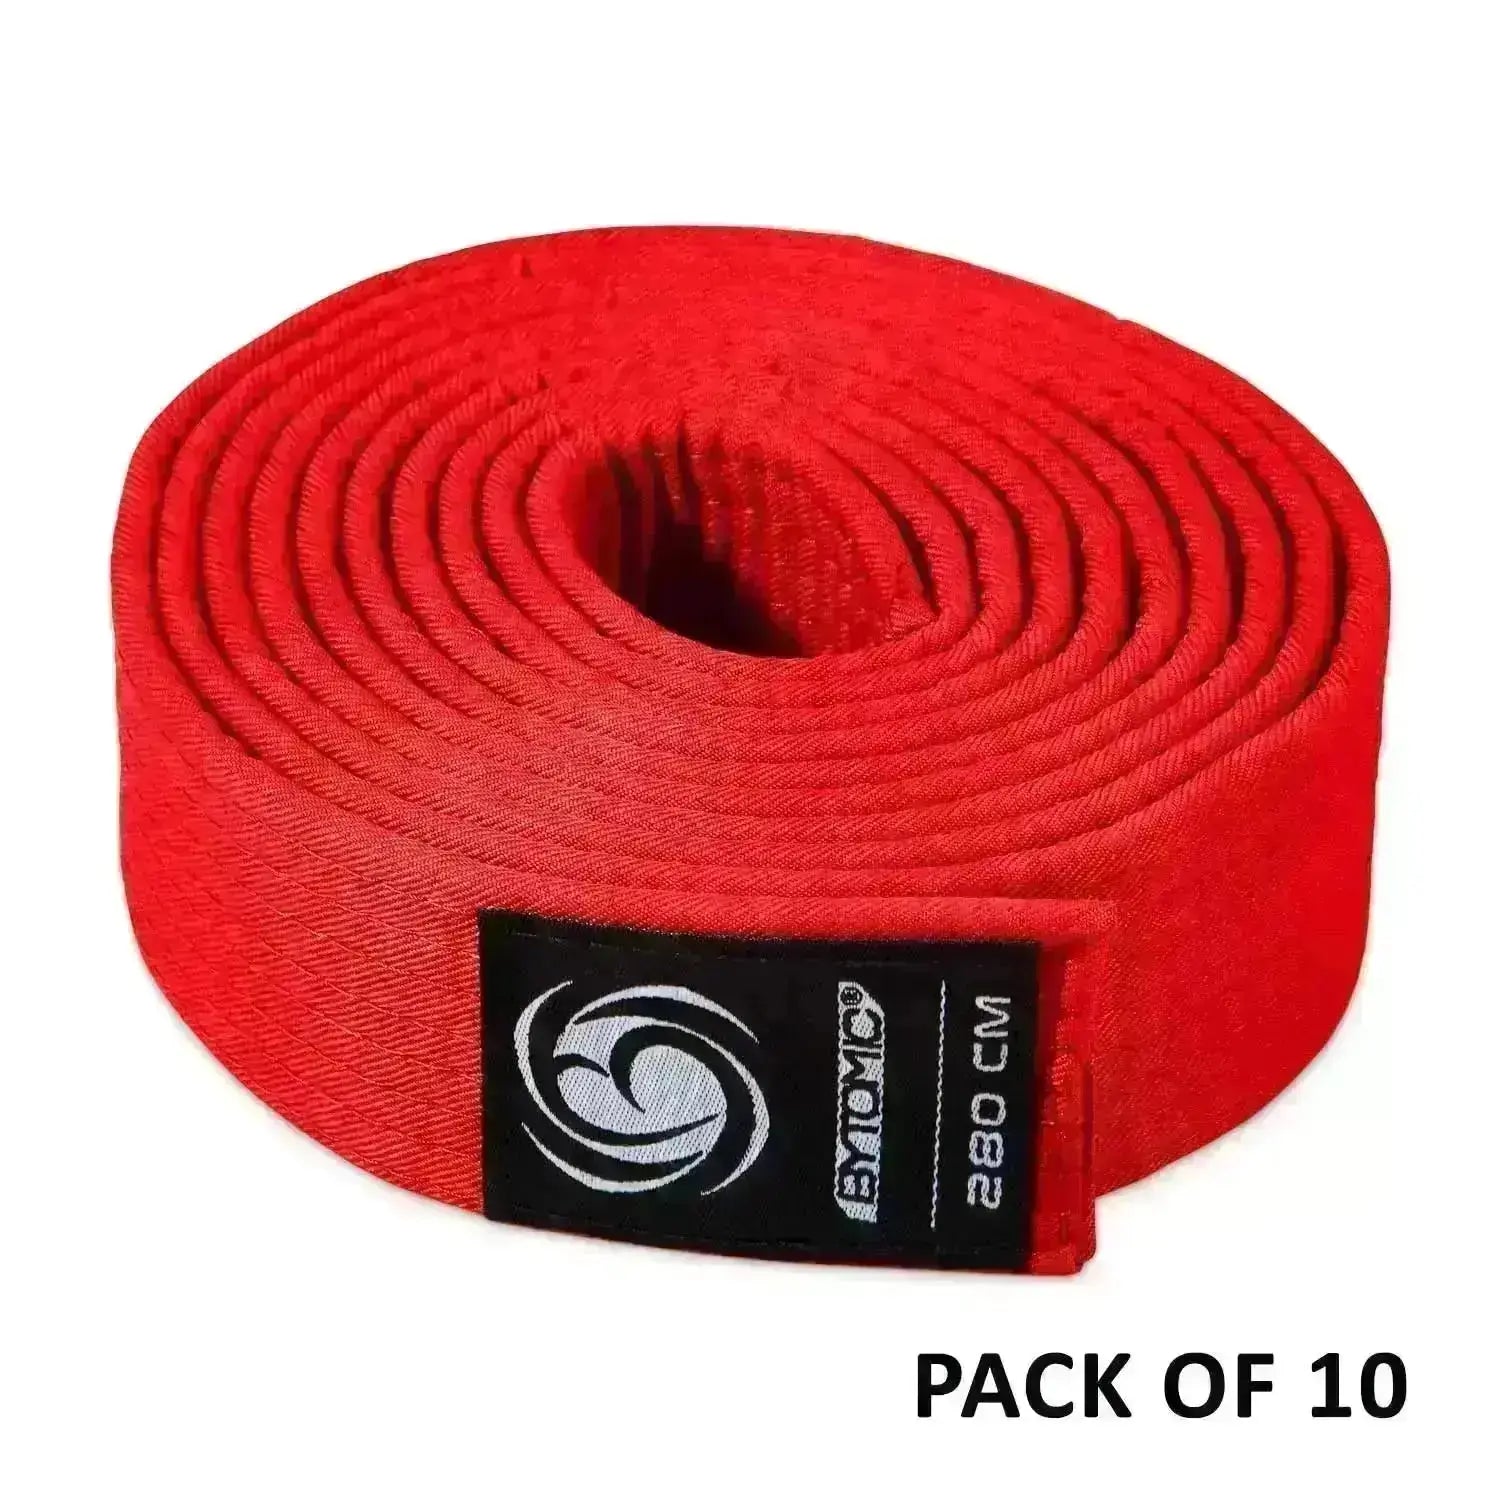 Bytomic Plain Polycotton Martial Arts Belt Pack of 10 Red-280cm Fight Co